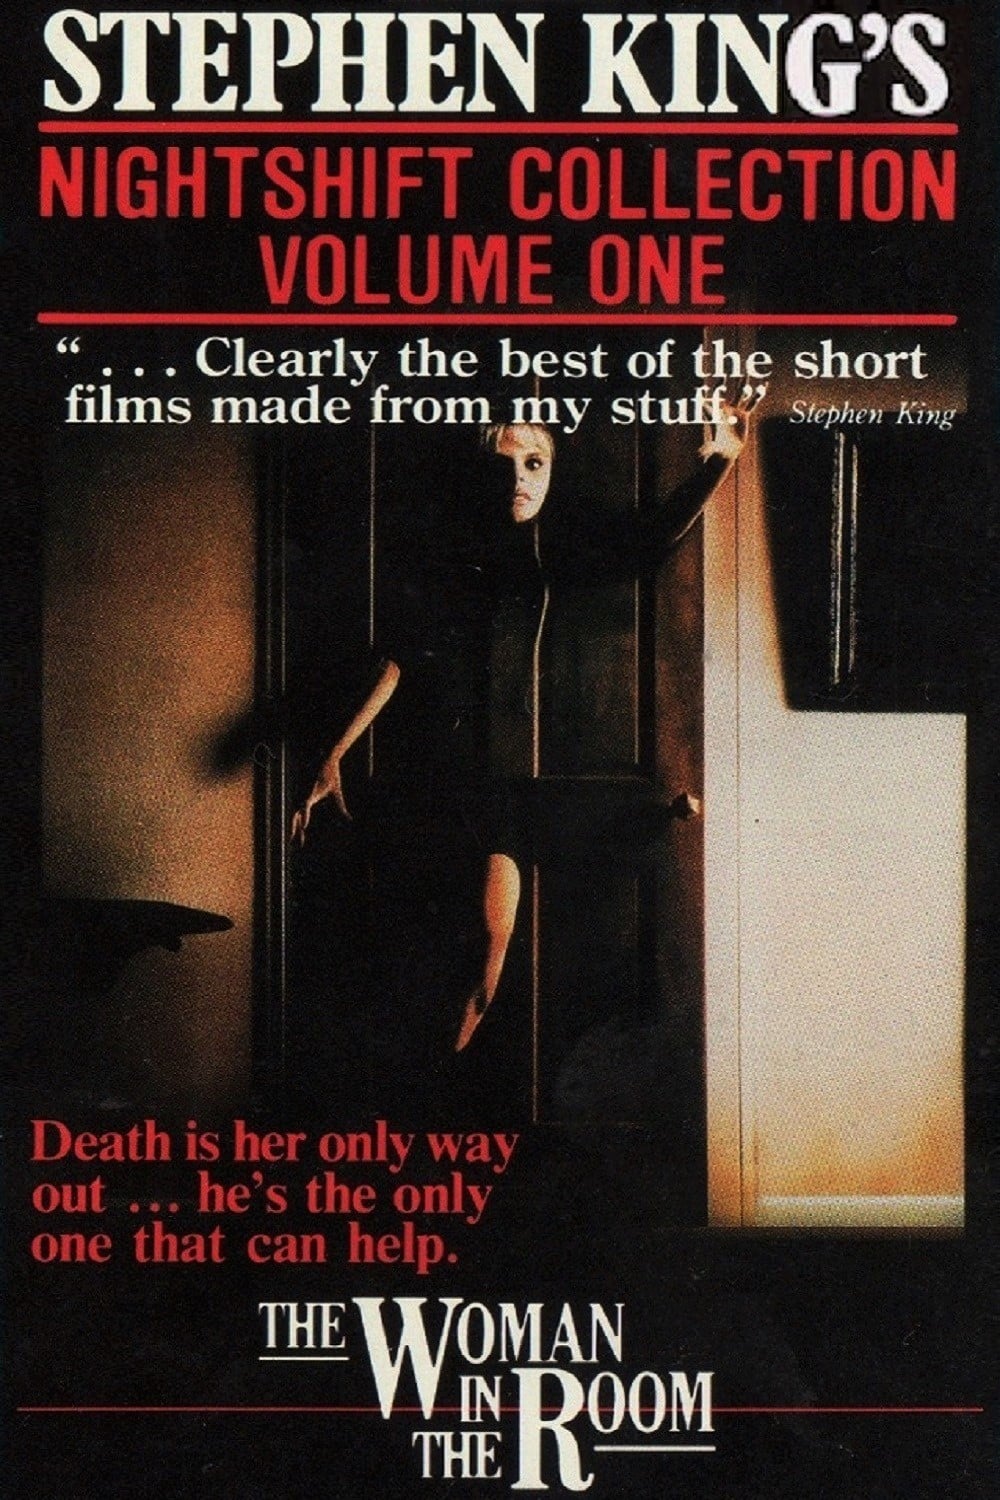 The Woman in the Room (1984) Screenshot 1 